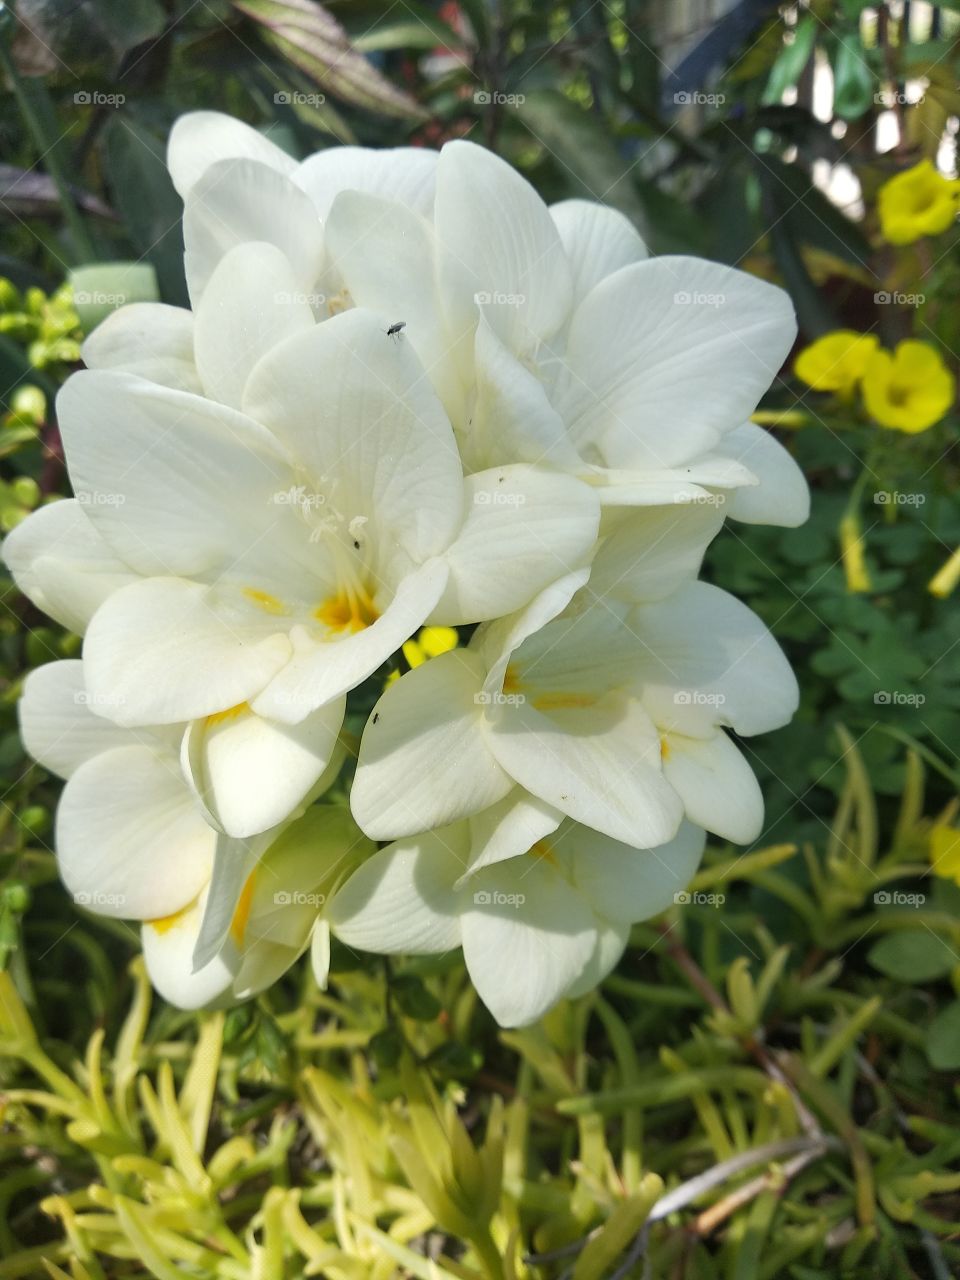 look how beautifilly this white flowers stand all together in my amazing garden and they also have some yellow cool buddies in the background!!